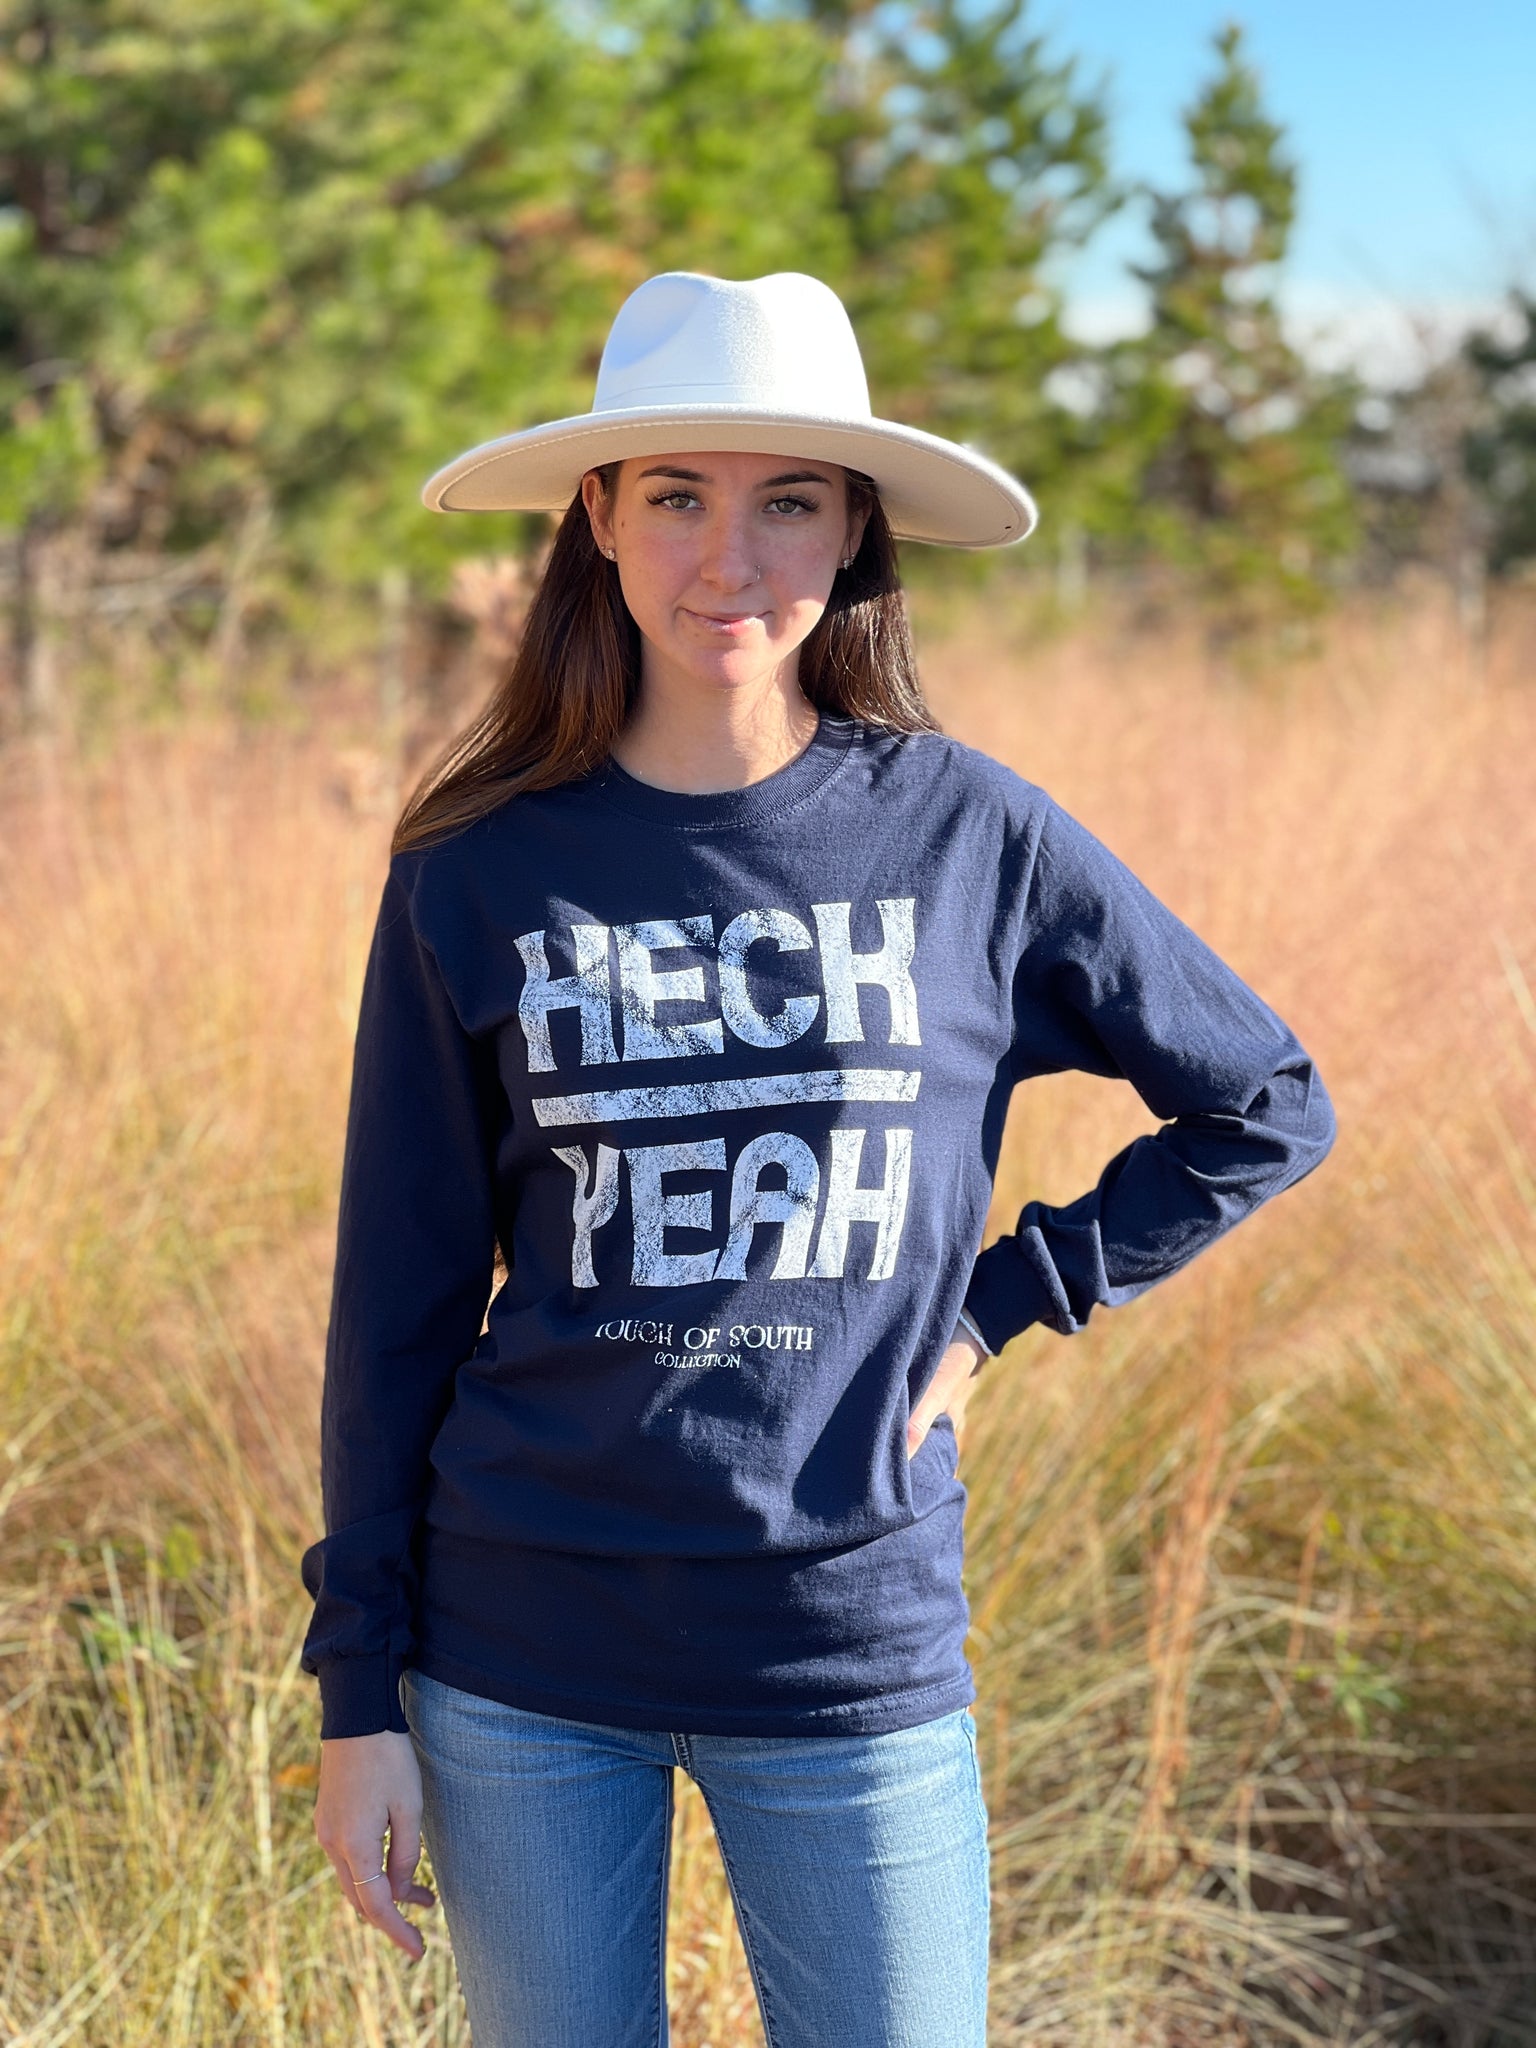 Navy long sleeve Southern T-shirt with "HECK YEAH" printed on the front.